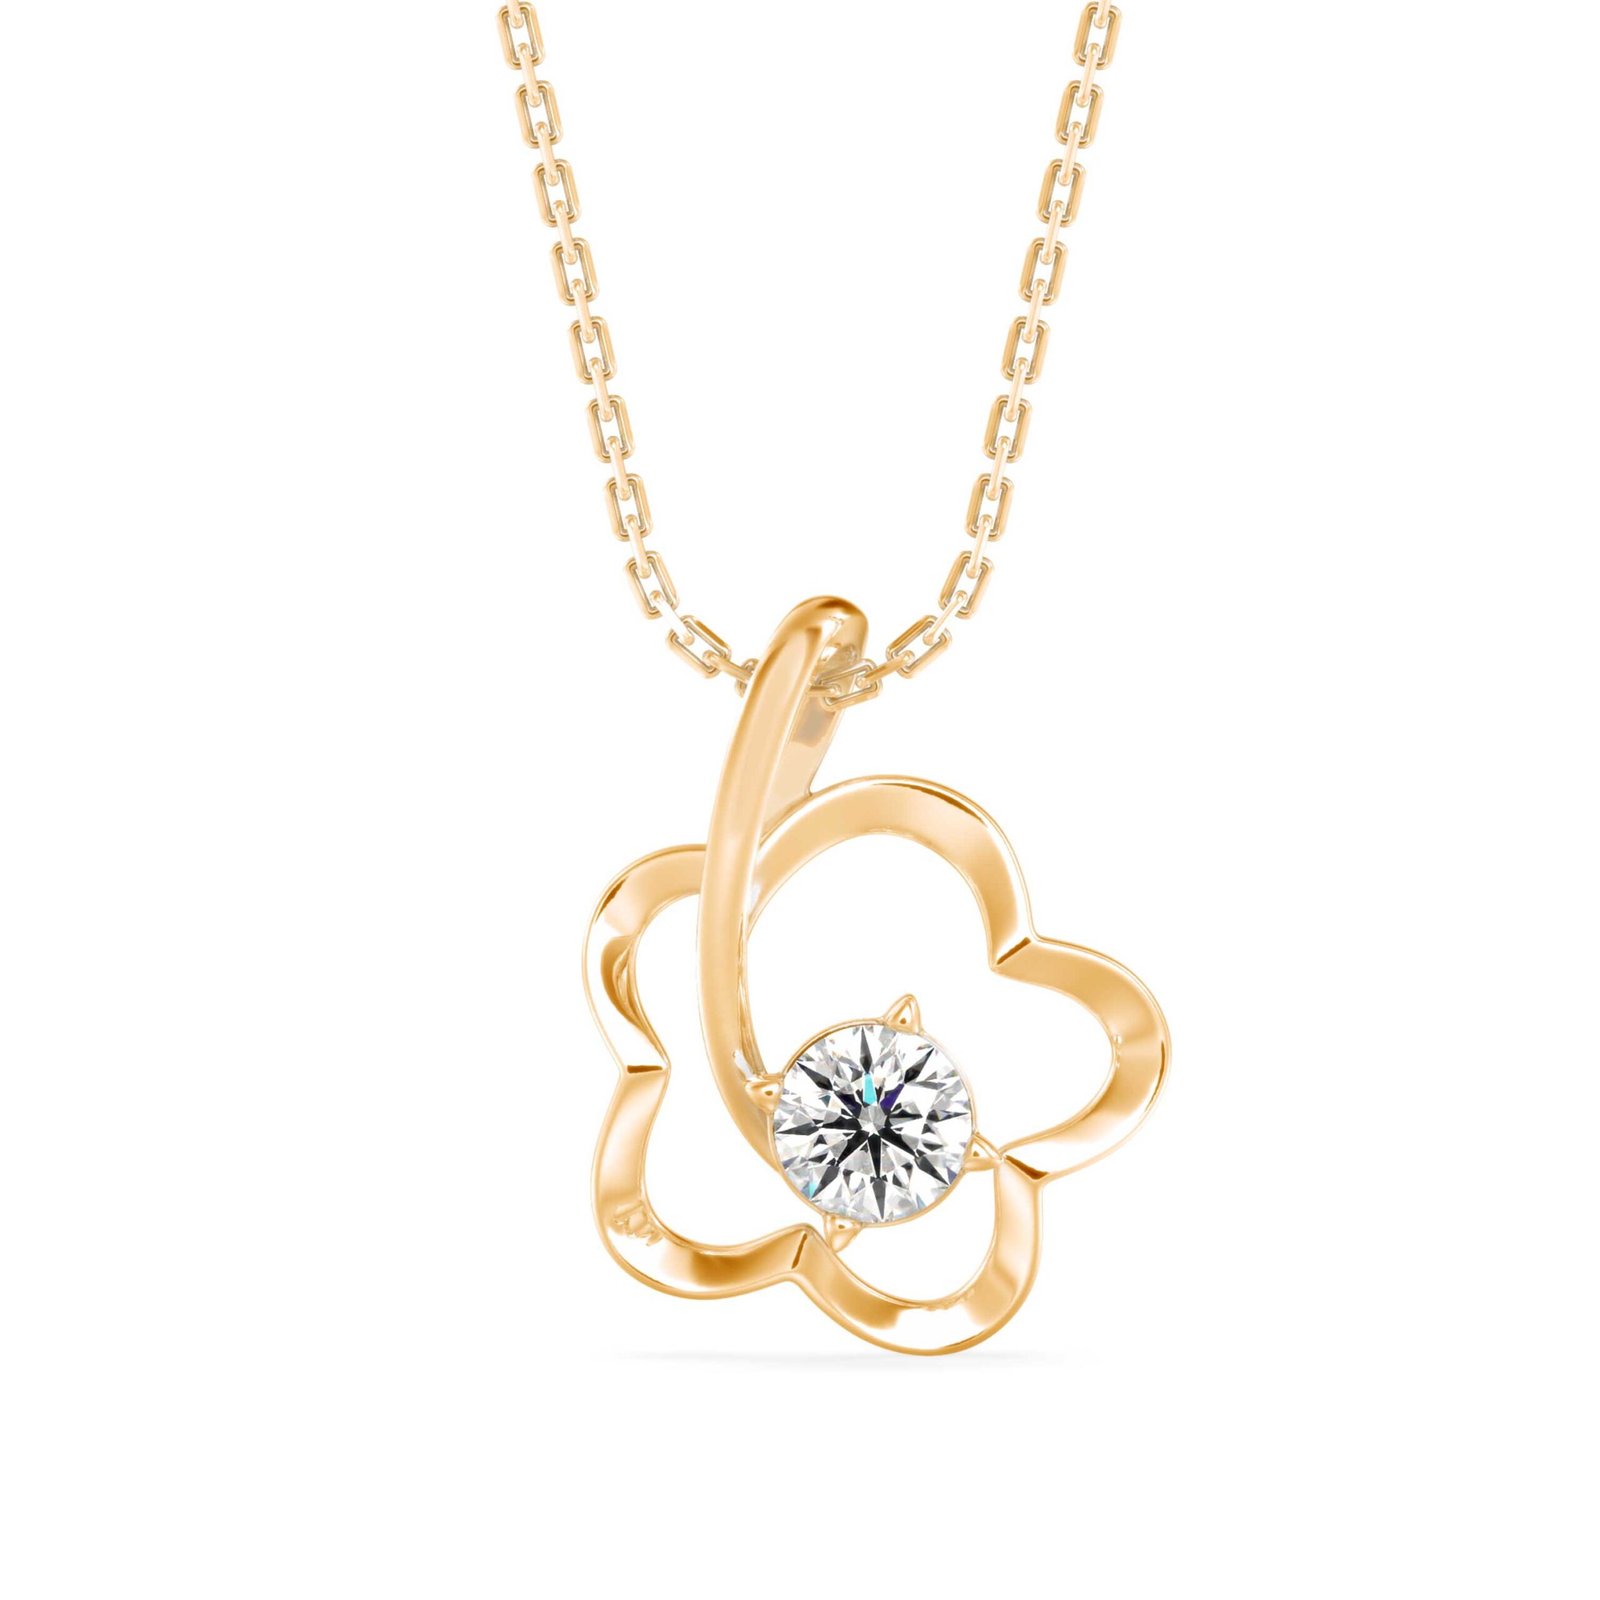 14k gold diamond and baguette daisy necklace – Ellie Jay